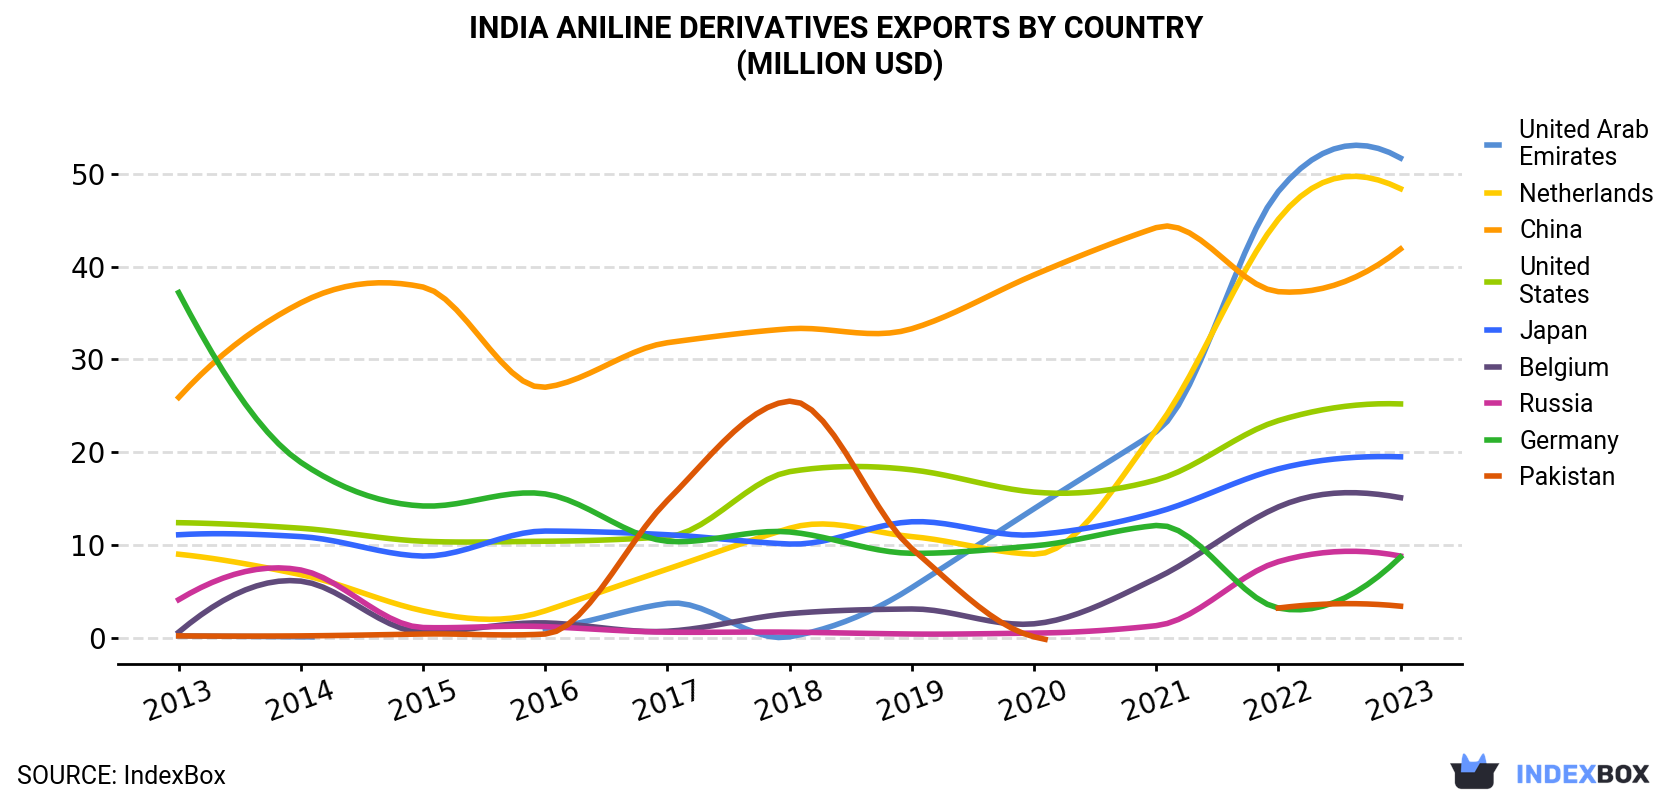 India Aniline Derivatives Exports By Country (Million USD)